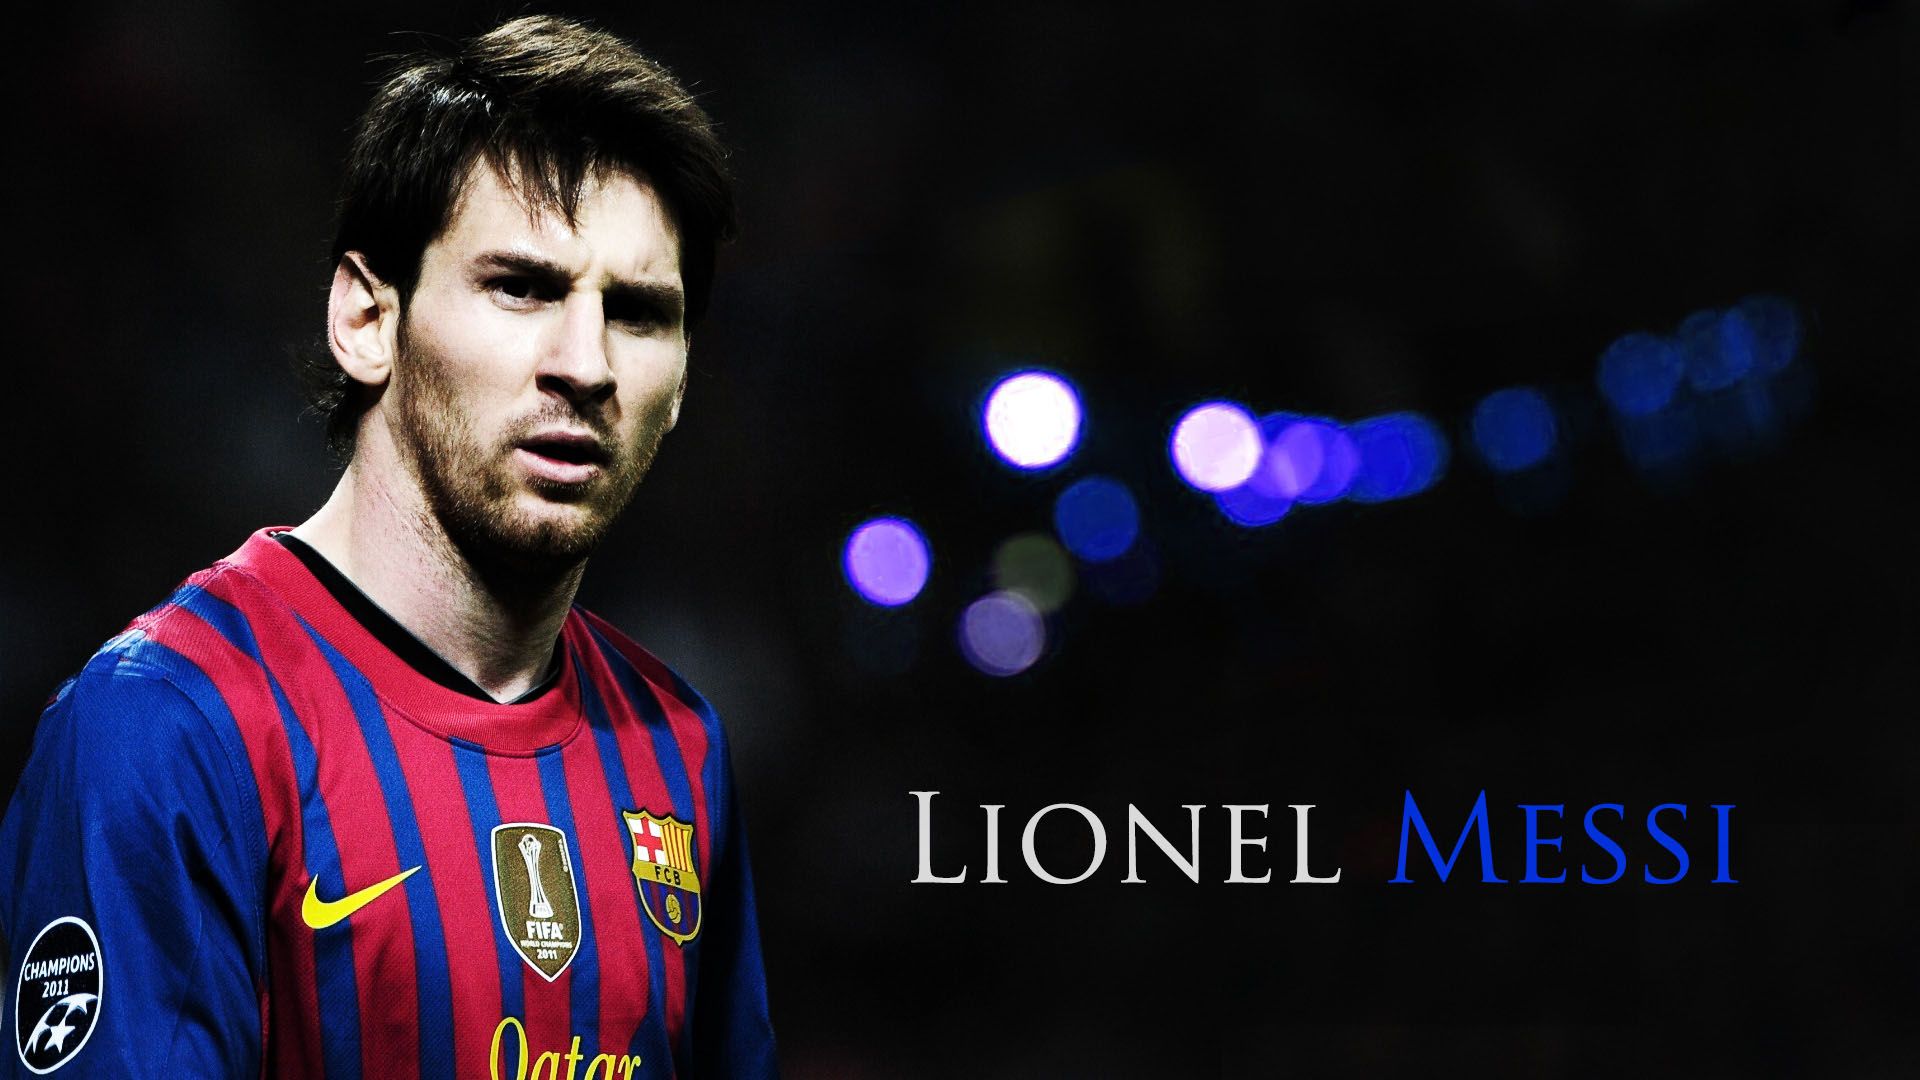 Lionel Messi Sport hgih quality Wallpaper Background 4 Photo Soft Copy Only